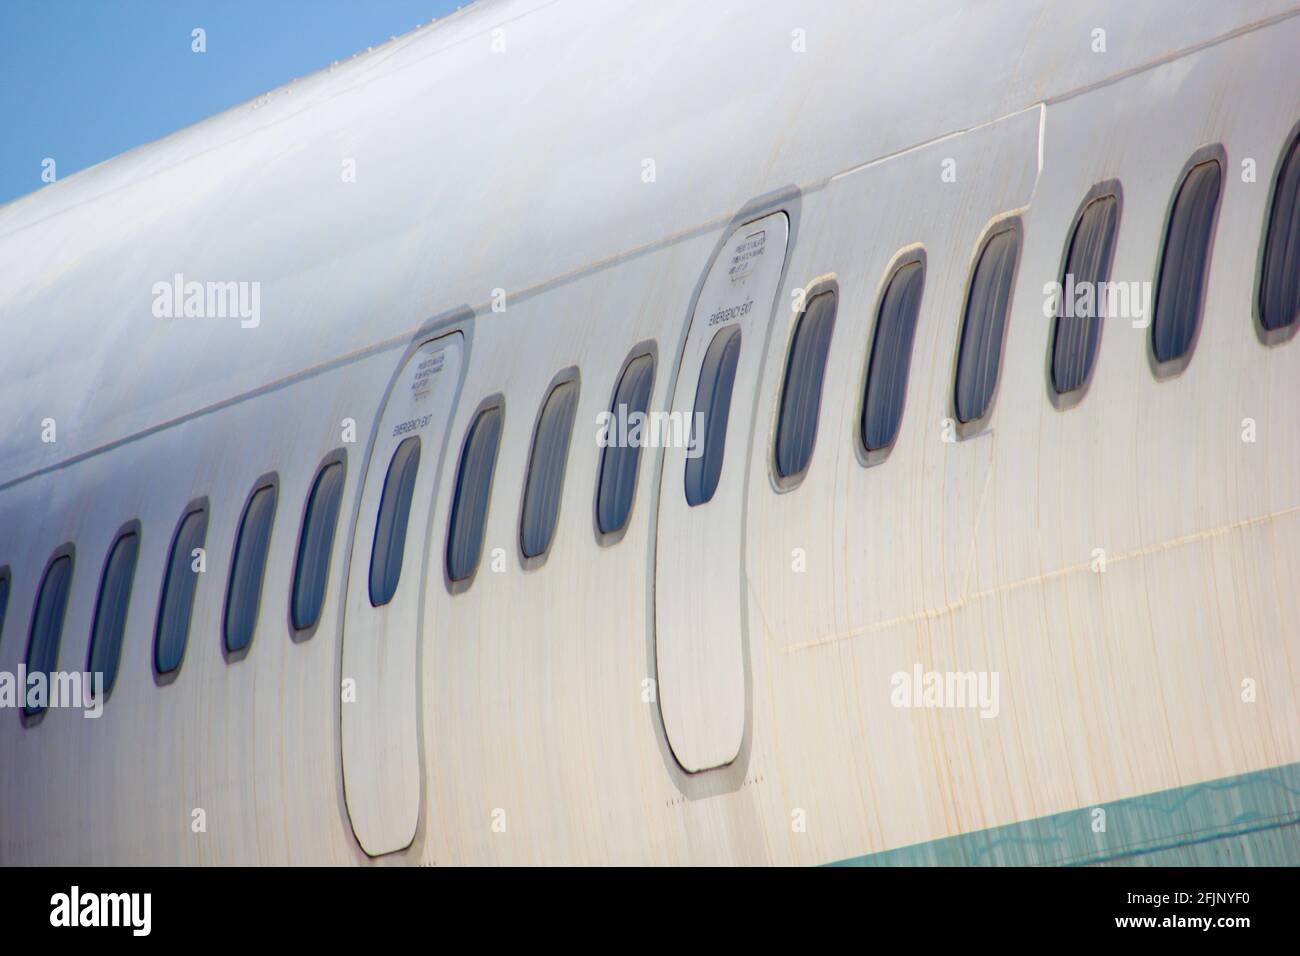 Emergency Exit Hatches And Window Ports On Passenger Plane Stock Photo